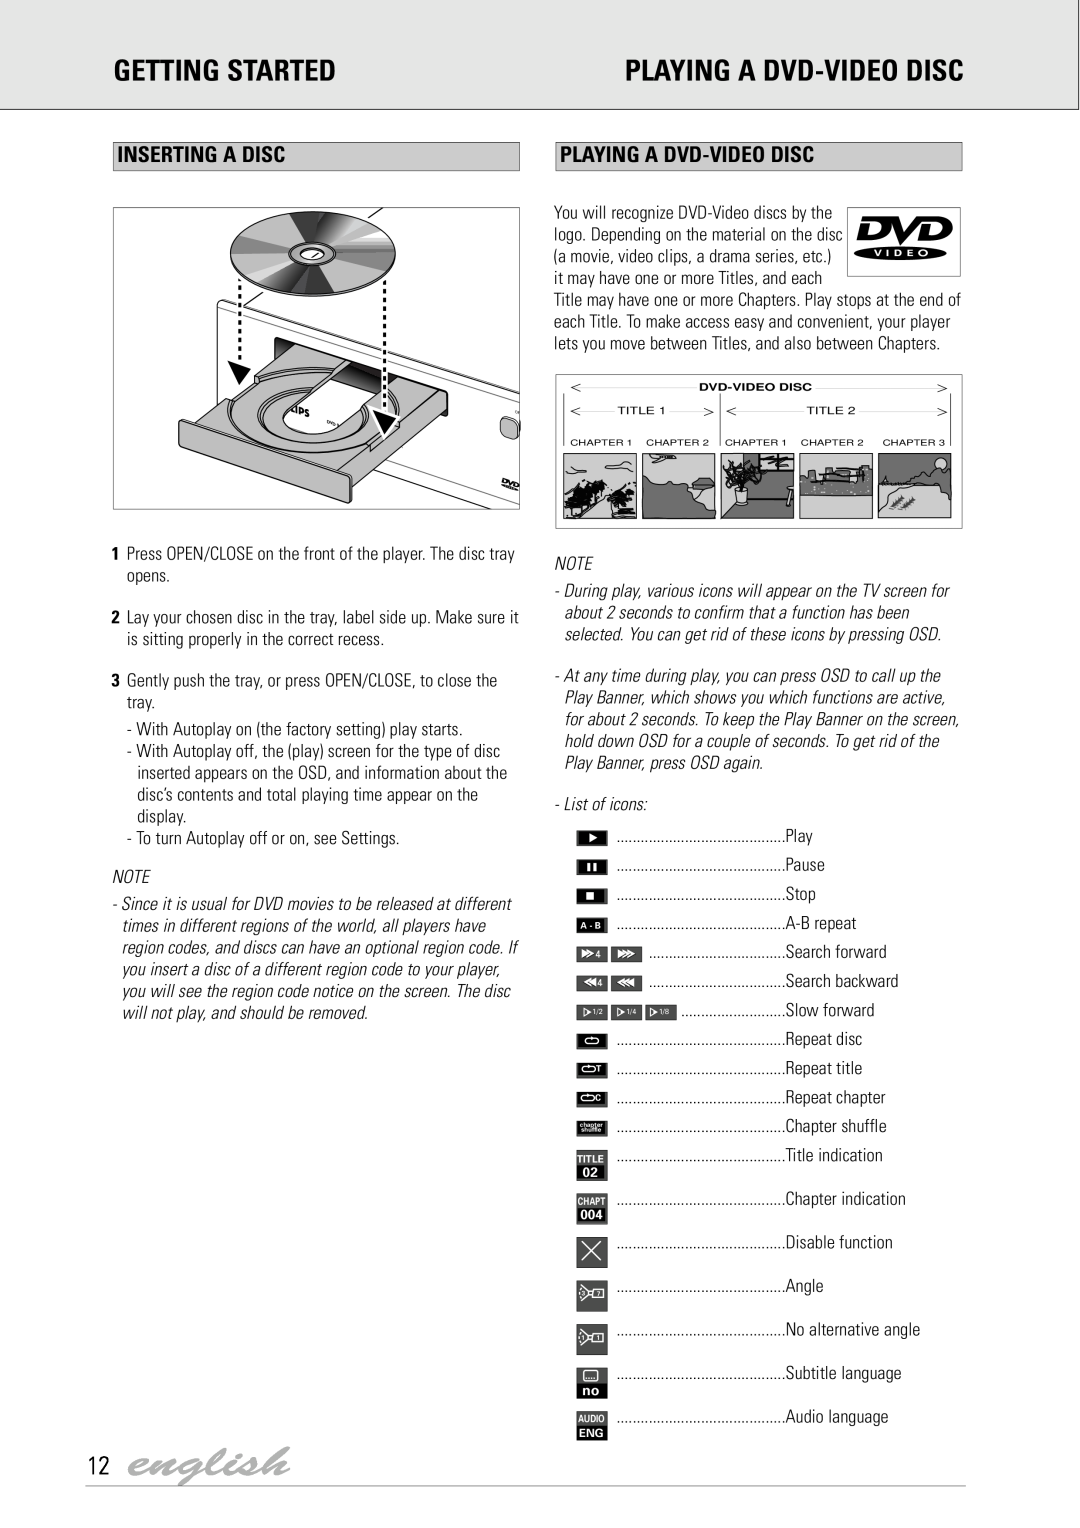 Dolby Laboratories DVD Video manual english, Playing A Dvd-Video Disc, Inserting A Disc, Audio language, Getting Started 